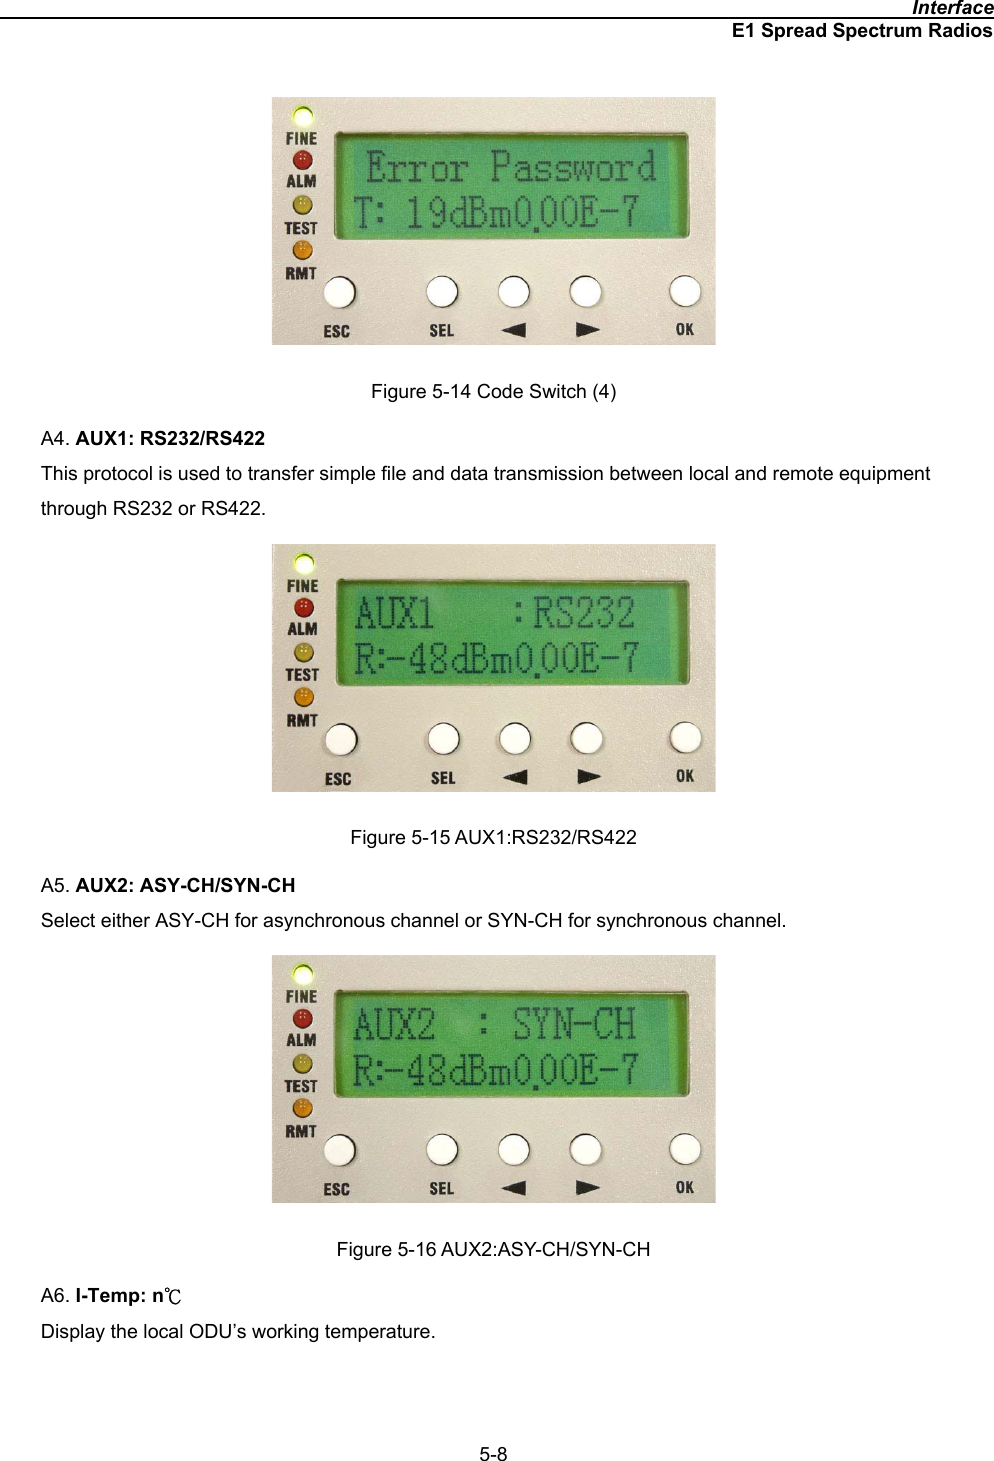                                                                                              InterfaceE1 Spread Spectrum Radios5-8Figure 5-14 Code Switch (4) A4. AUX1: RS232/RS422This protocol is used to transfer simple file and data transmission between local and remote equipment through RS232 or RS422. Figure 5-15 AUX1:RS232/RS422 A5. AUX2: ASY-CH/SYN-CHSelect either ASY-CH for asynchronous channel or SYN-CH for synchronous channel. Figure 5-16 AUX2:ASY-CH/SYN-CH A6. I-Temp: nкDisplay the local ODU’s working temperature. 